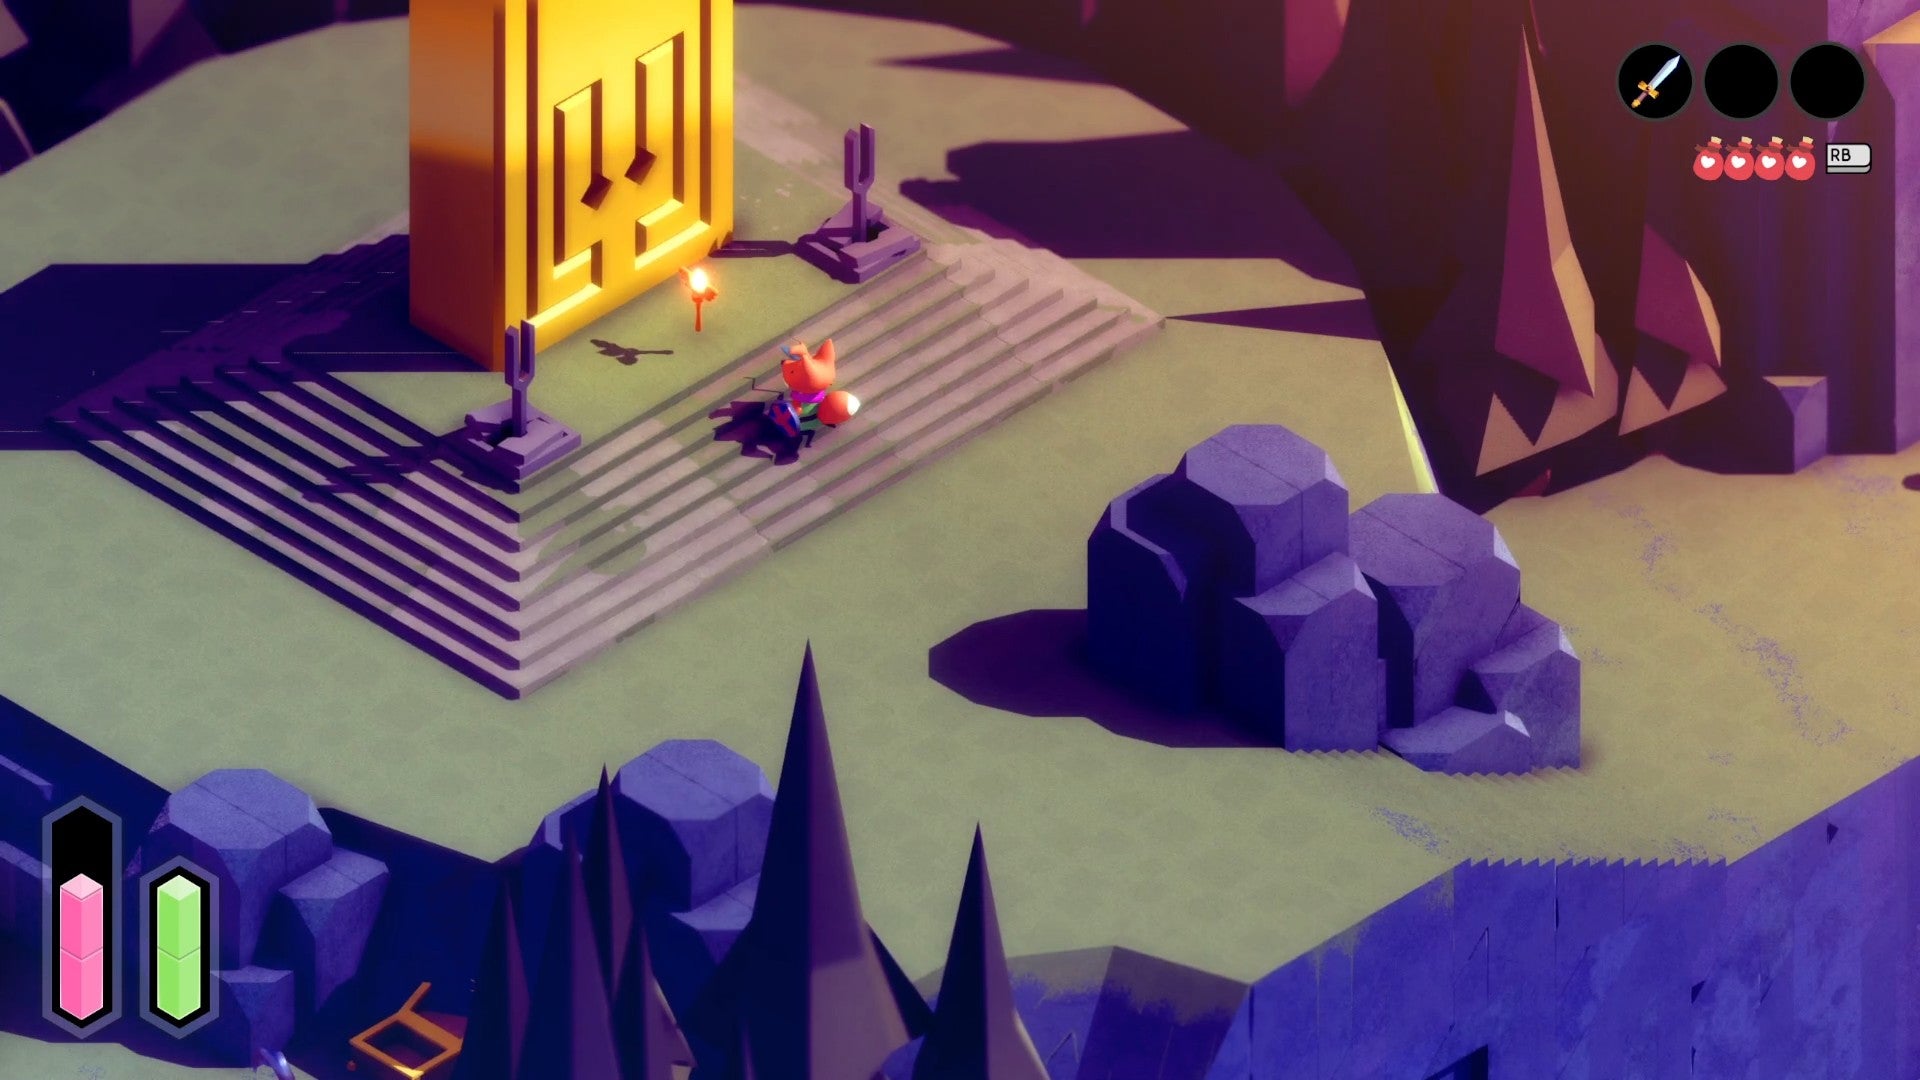 Tunic fox walking up to a gold structure with a wand on the ground on a mountainside